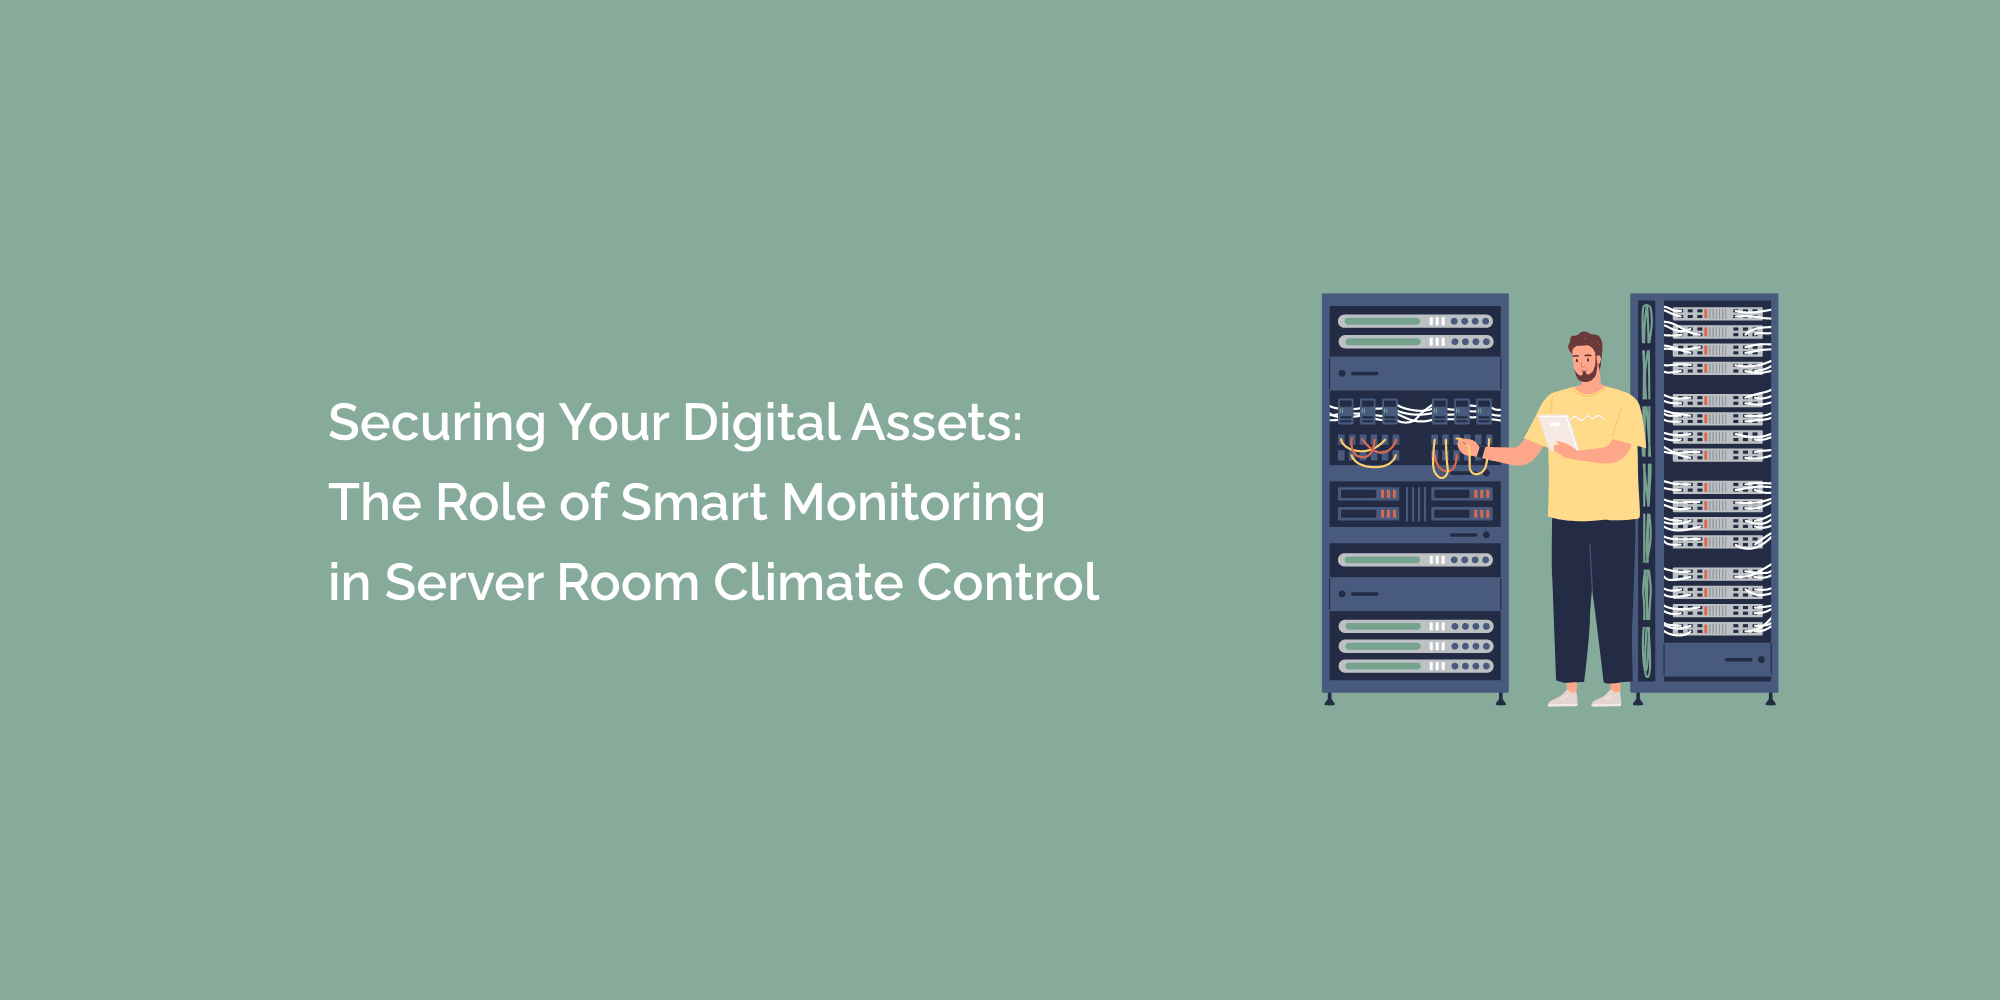 Securing Your Digital Assets: The Role of Smart Monitoring in Server Room Climate Control